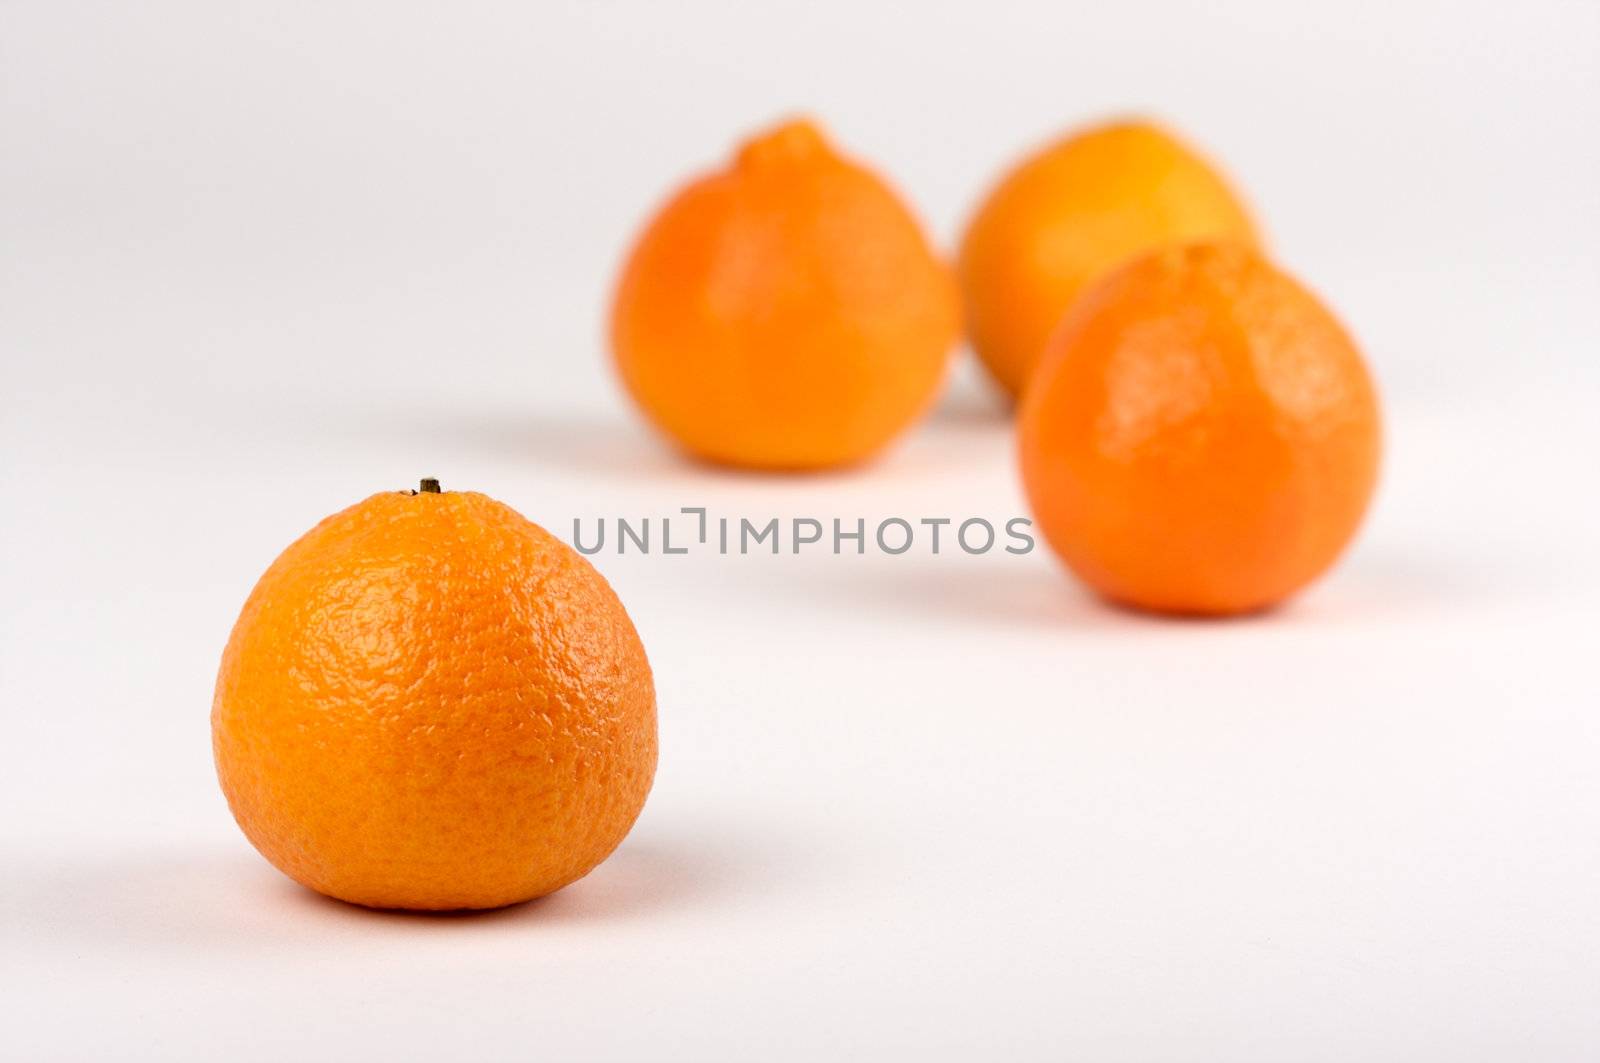 Clementine Oranges by Feverpitched